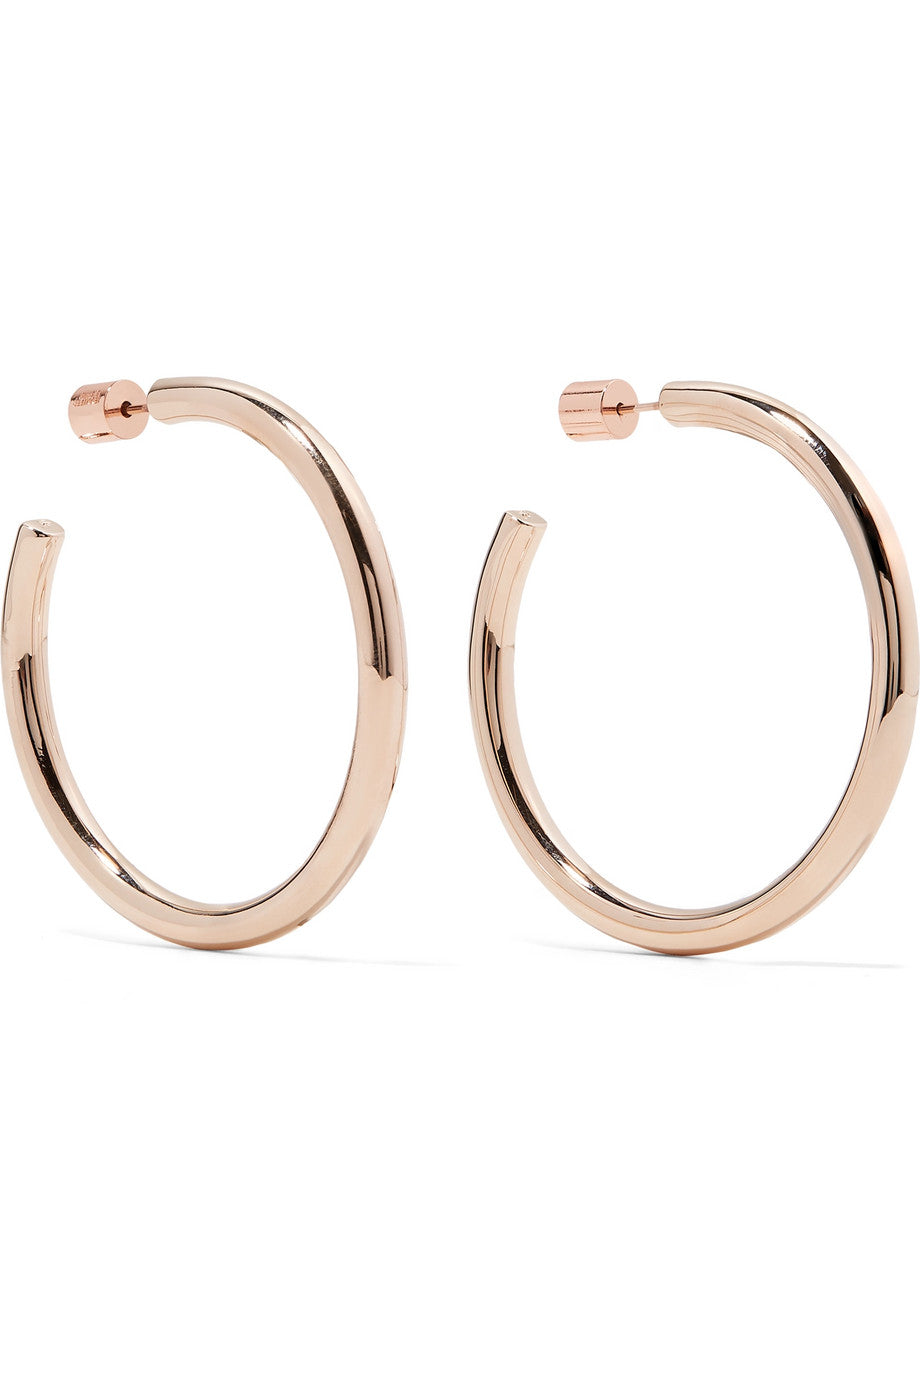 Jennifer Fisher - 'Baby lilly' rose-gold plated hoop earrings